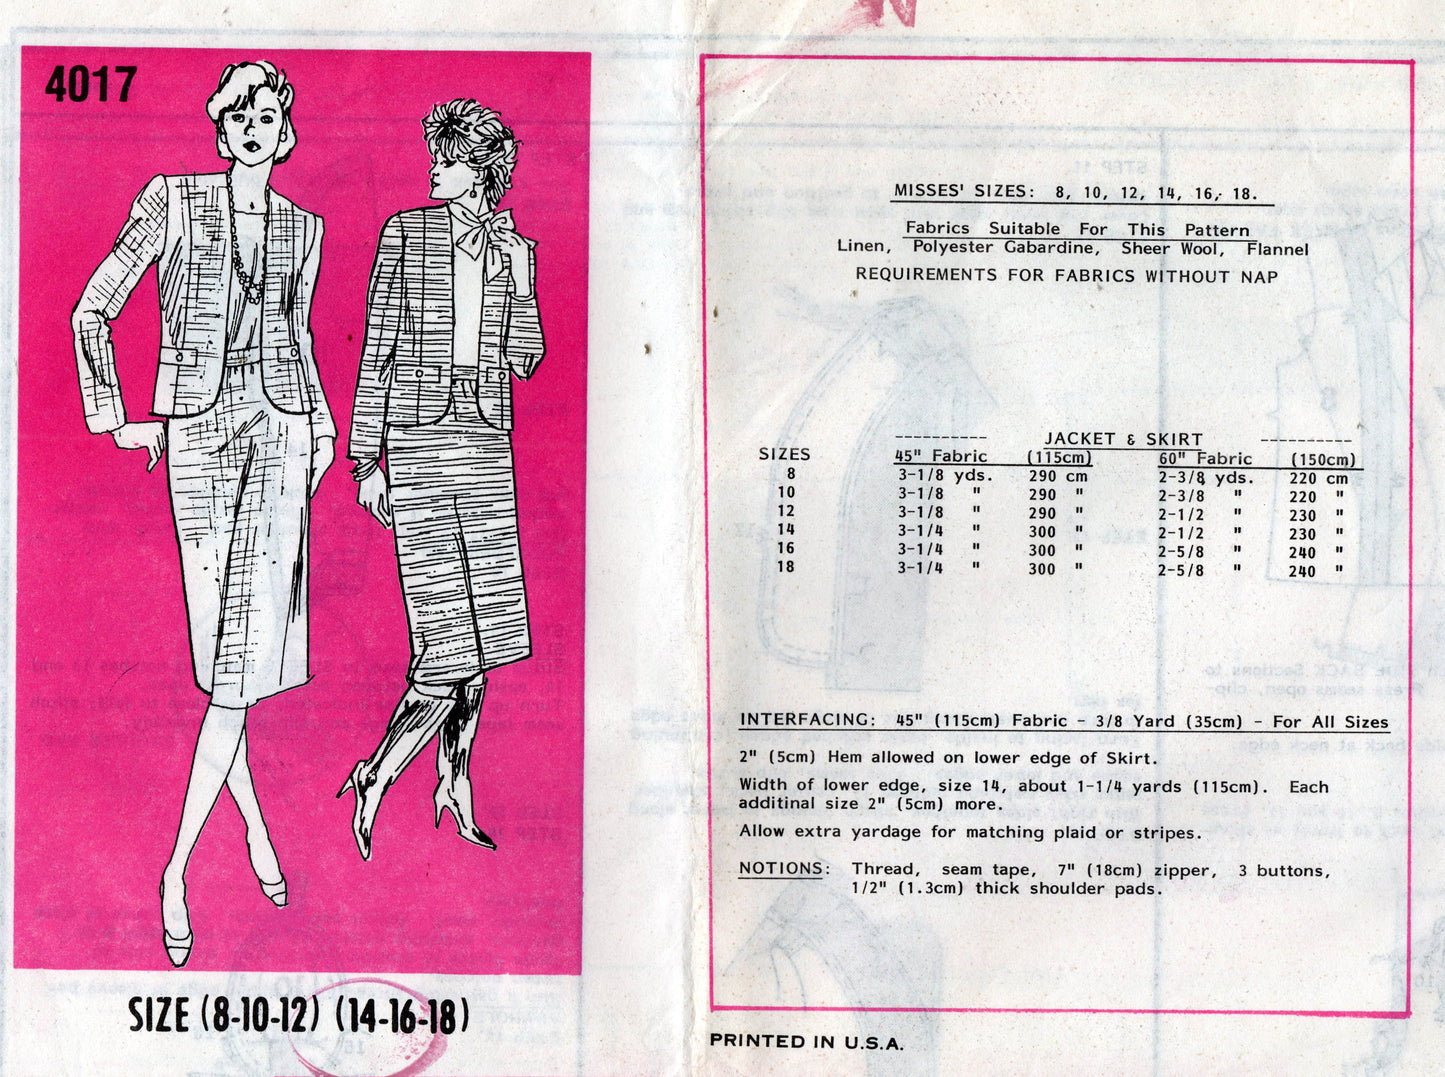 Mail Order 4017 Womens Collarless Jacket & Skirt 1970s Vintage Sewing Pattern Size 14 - 18 UNCUT Factory Folded